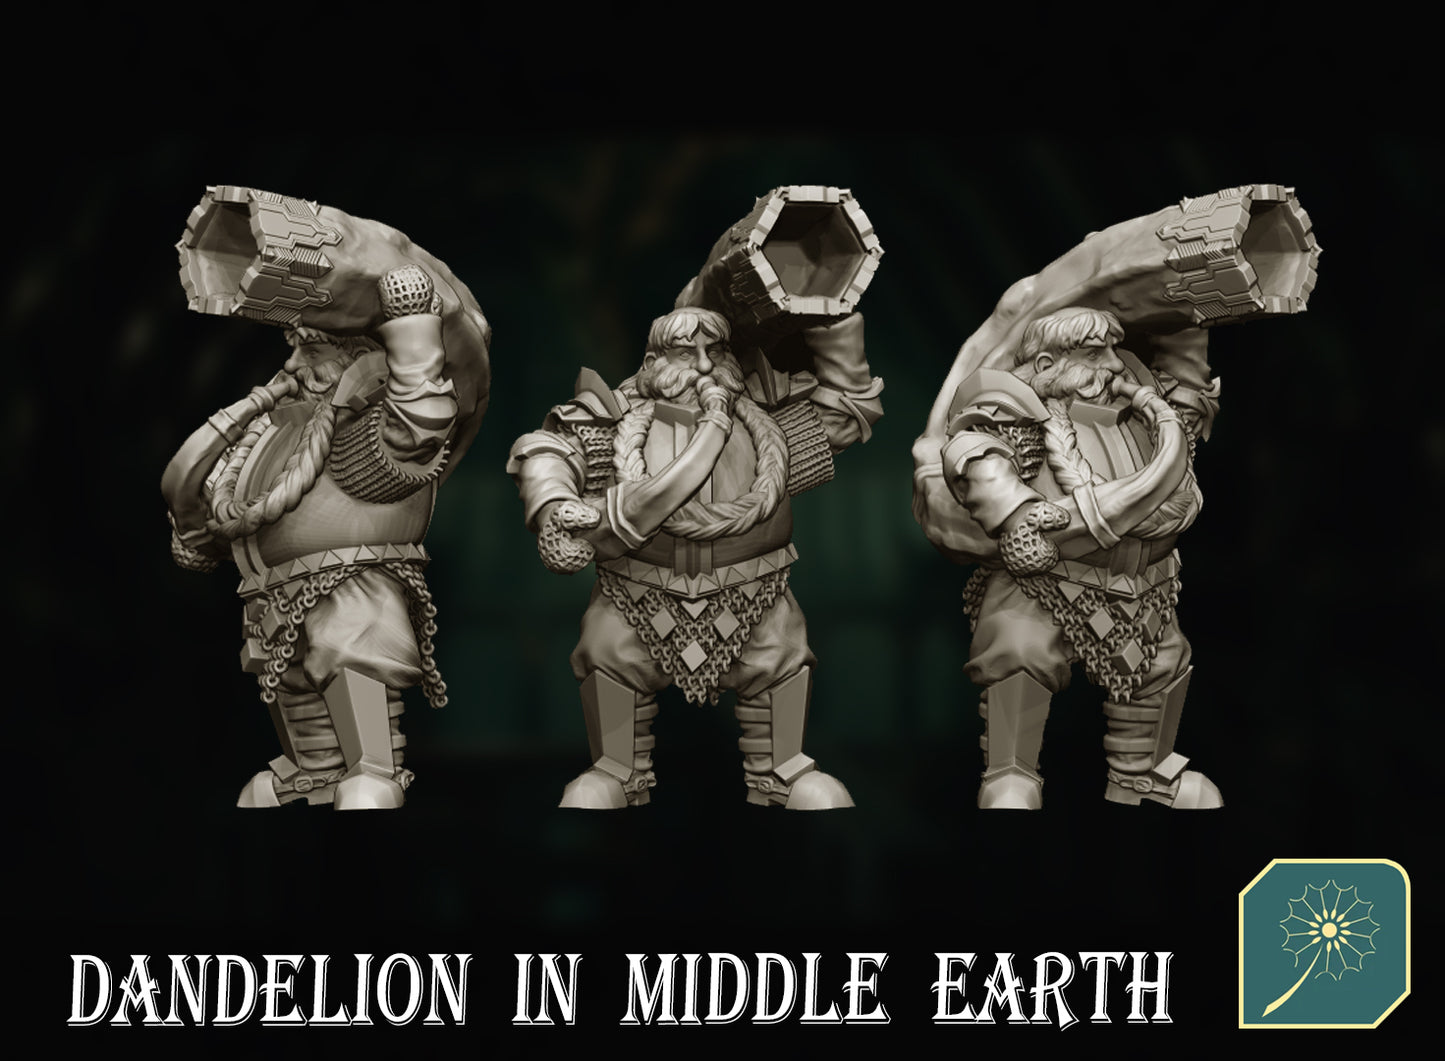 Master Dwarf Grombur (flail, warhorn or armored with flail) from Dandelion in Middle Earth